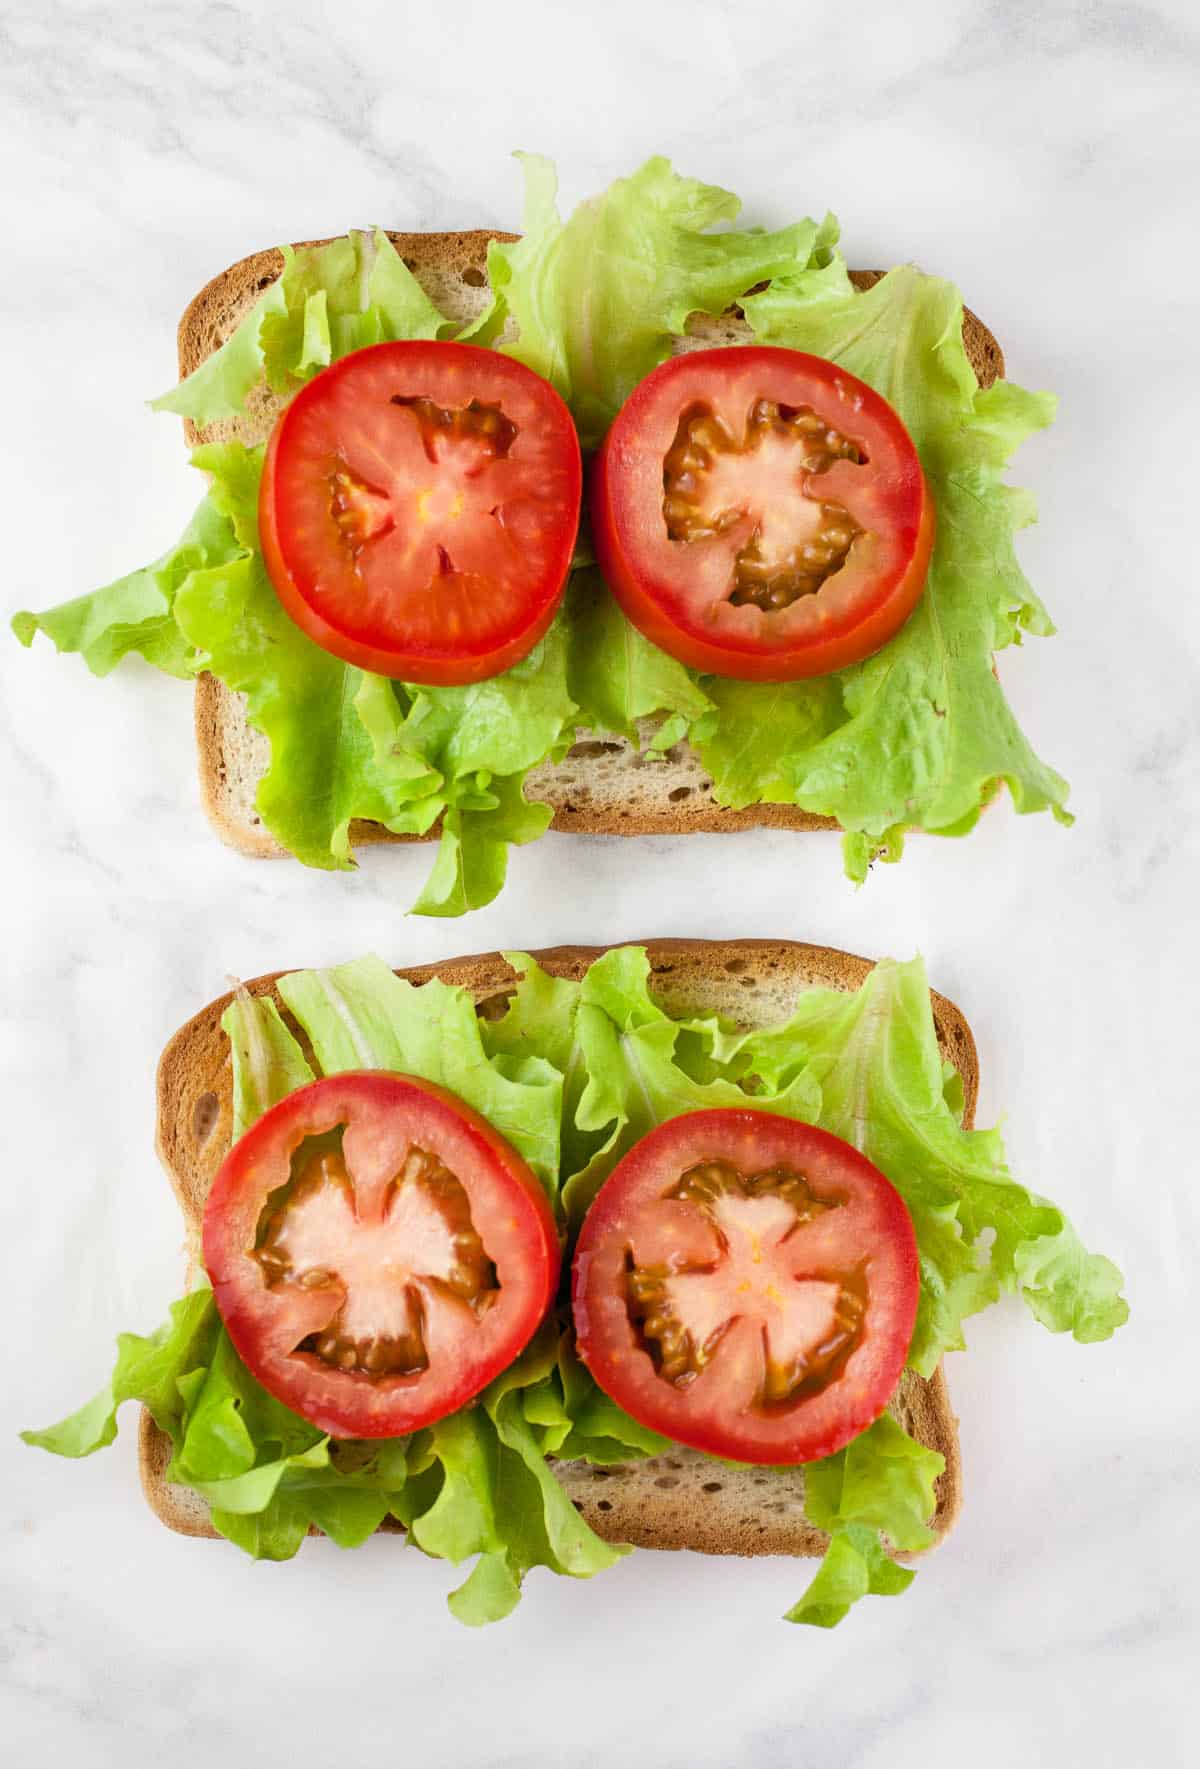 Tomato slices and lettuce on toasted bread.